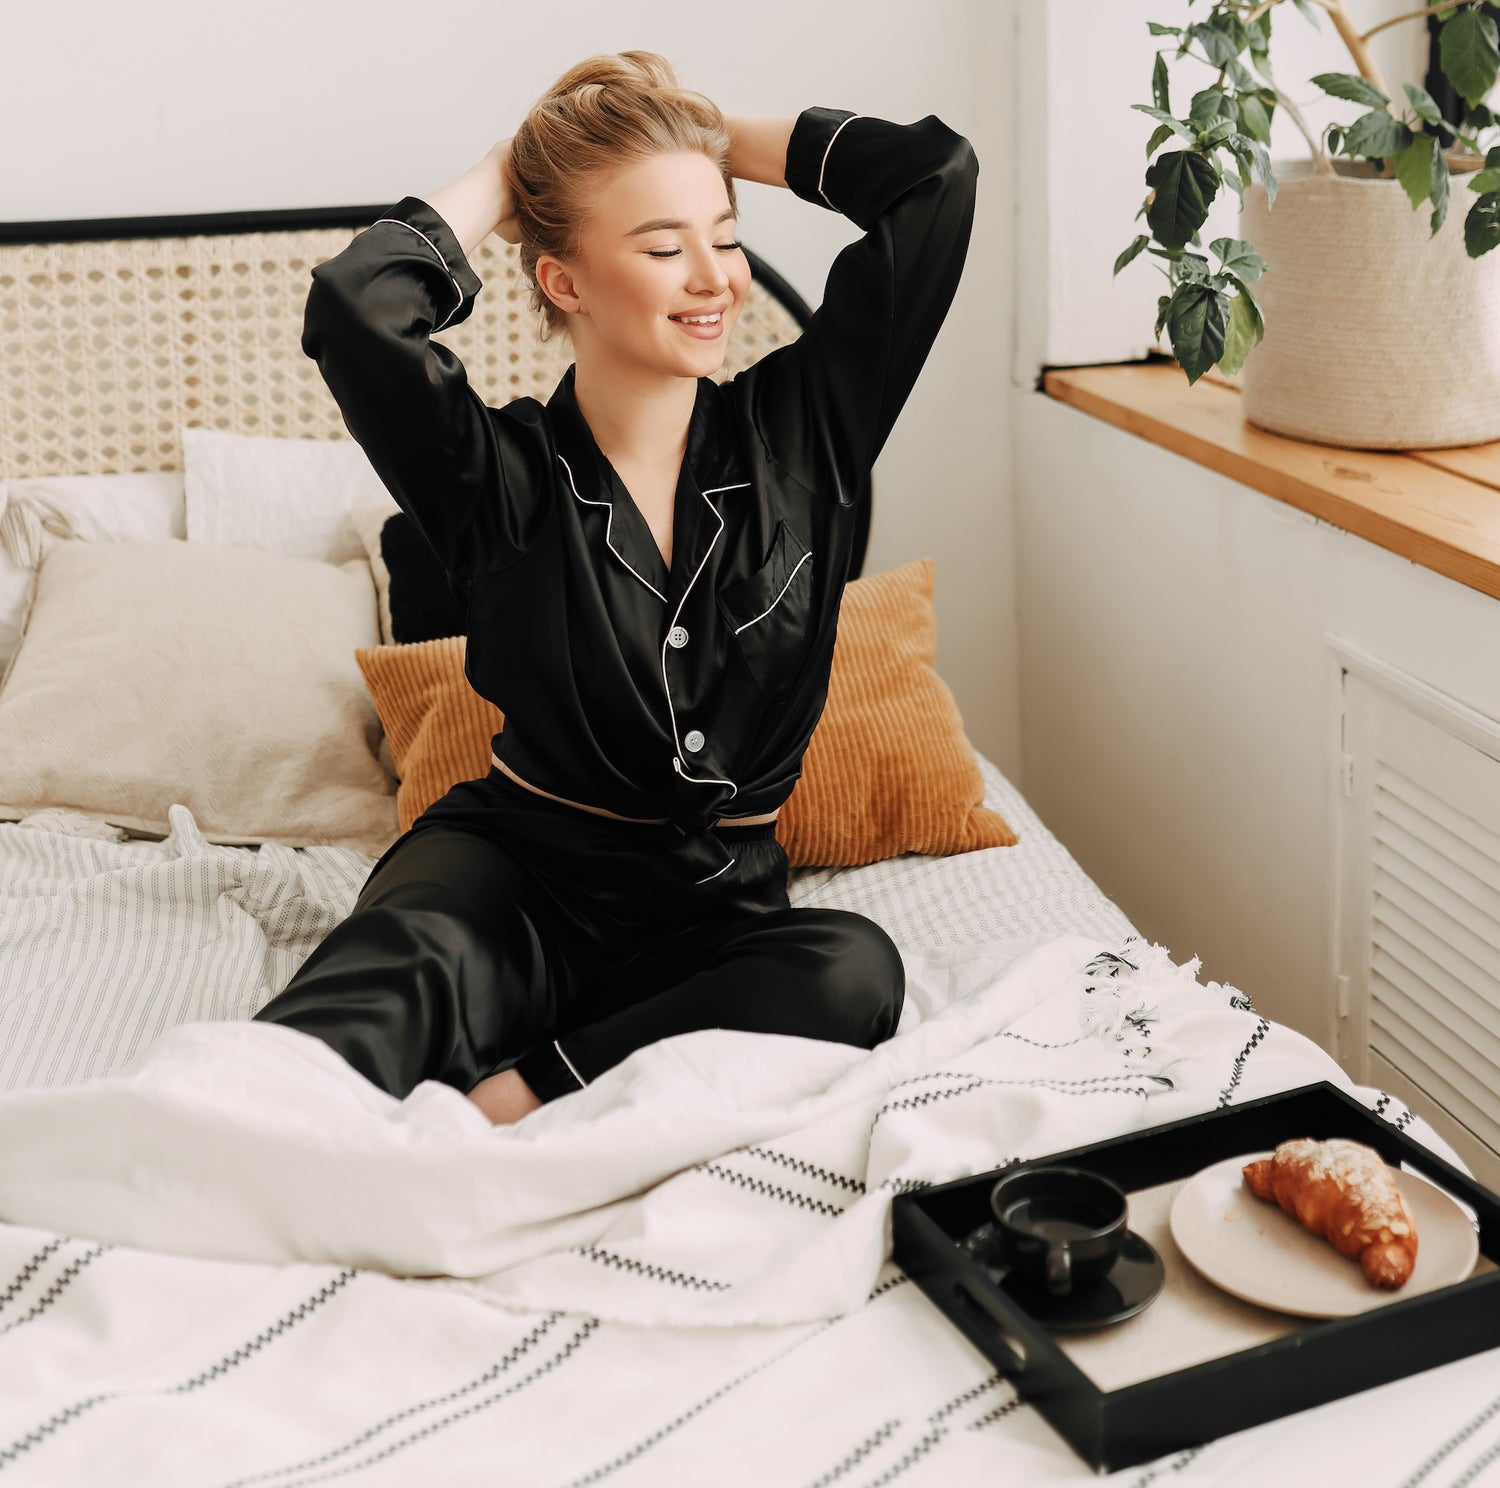 5 Easy Gratitude Practices to Include in Your Nightly Routine